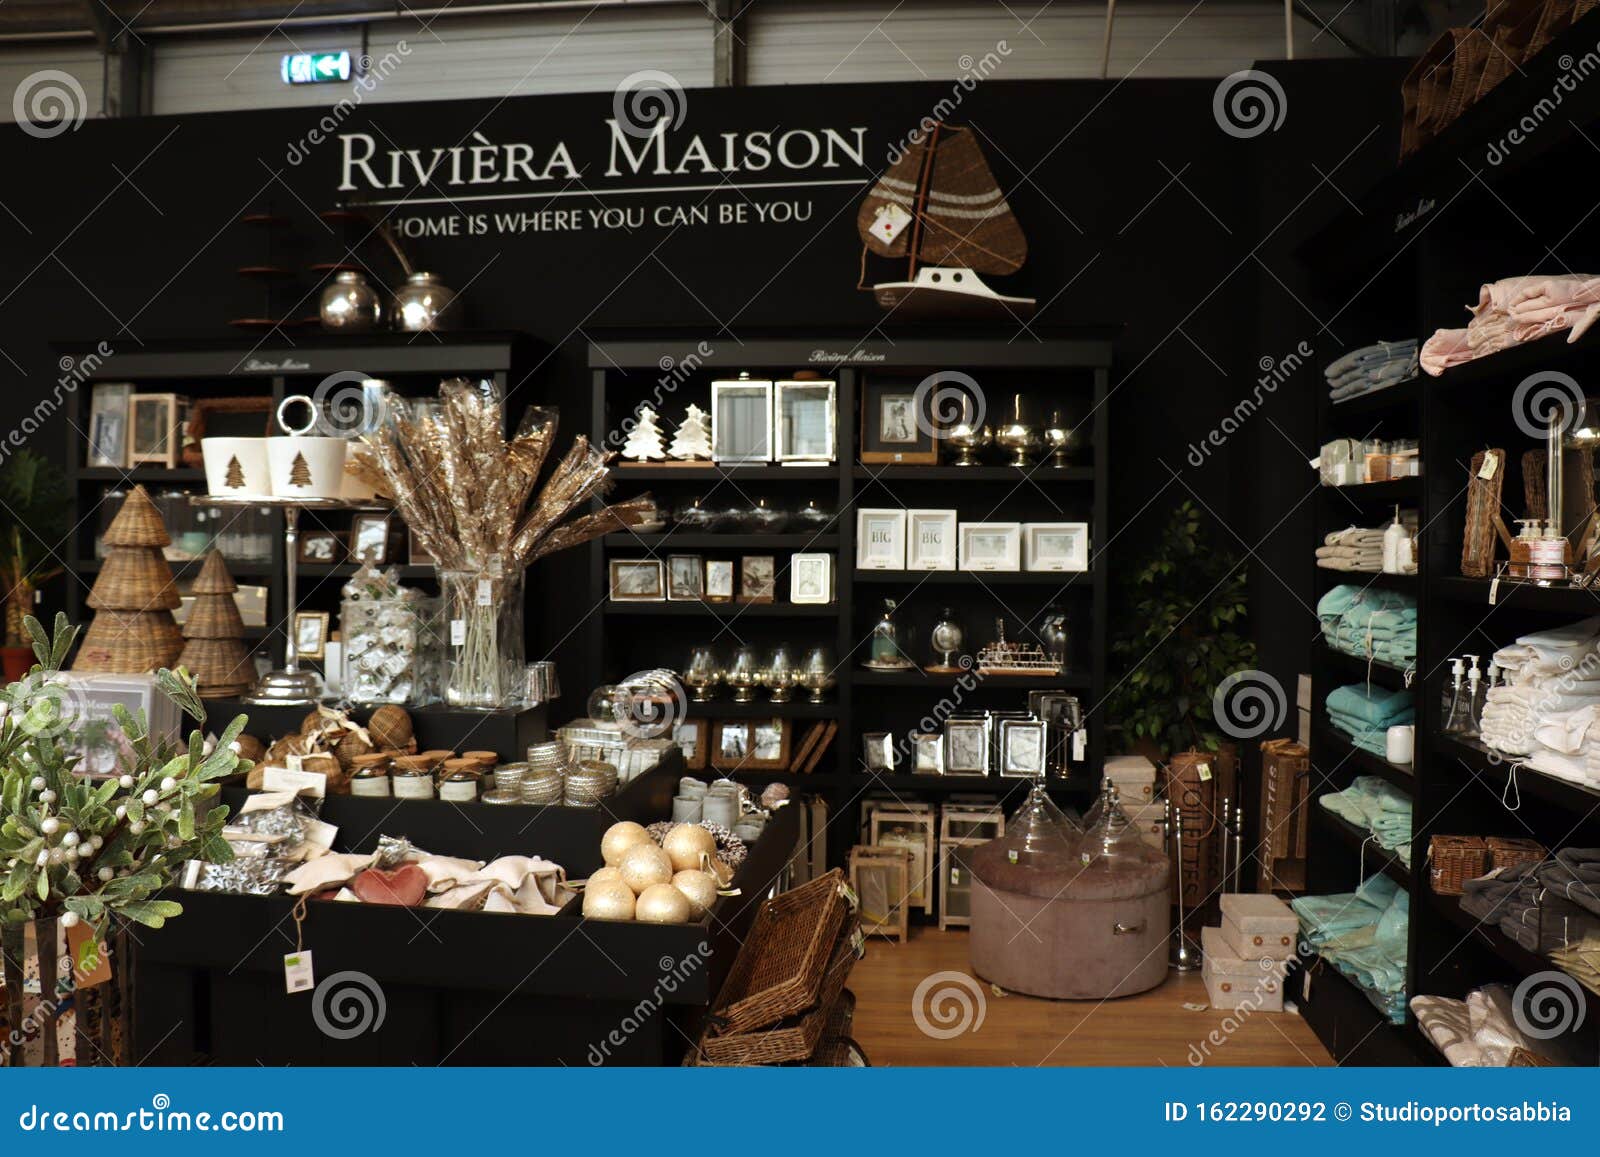 the Netherlands - October 26th 2018: Riviera Maison Retail Display in Interior Shop Editorial Photography - Image of shelves, merchandise: